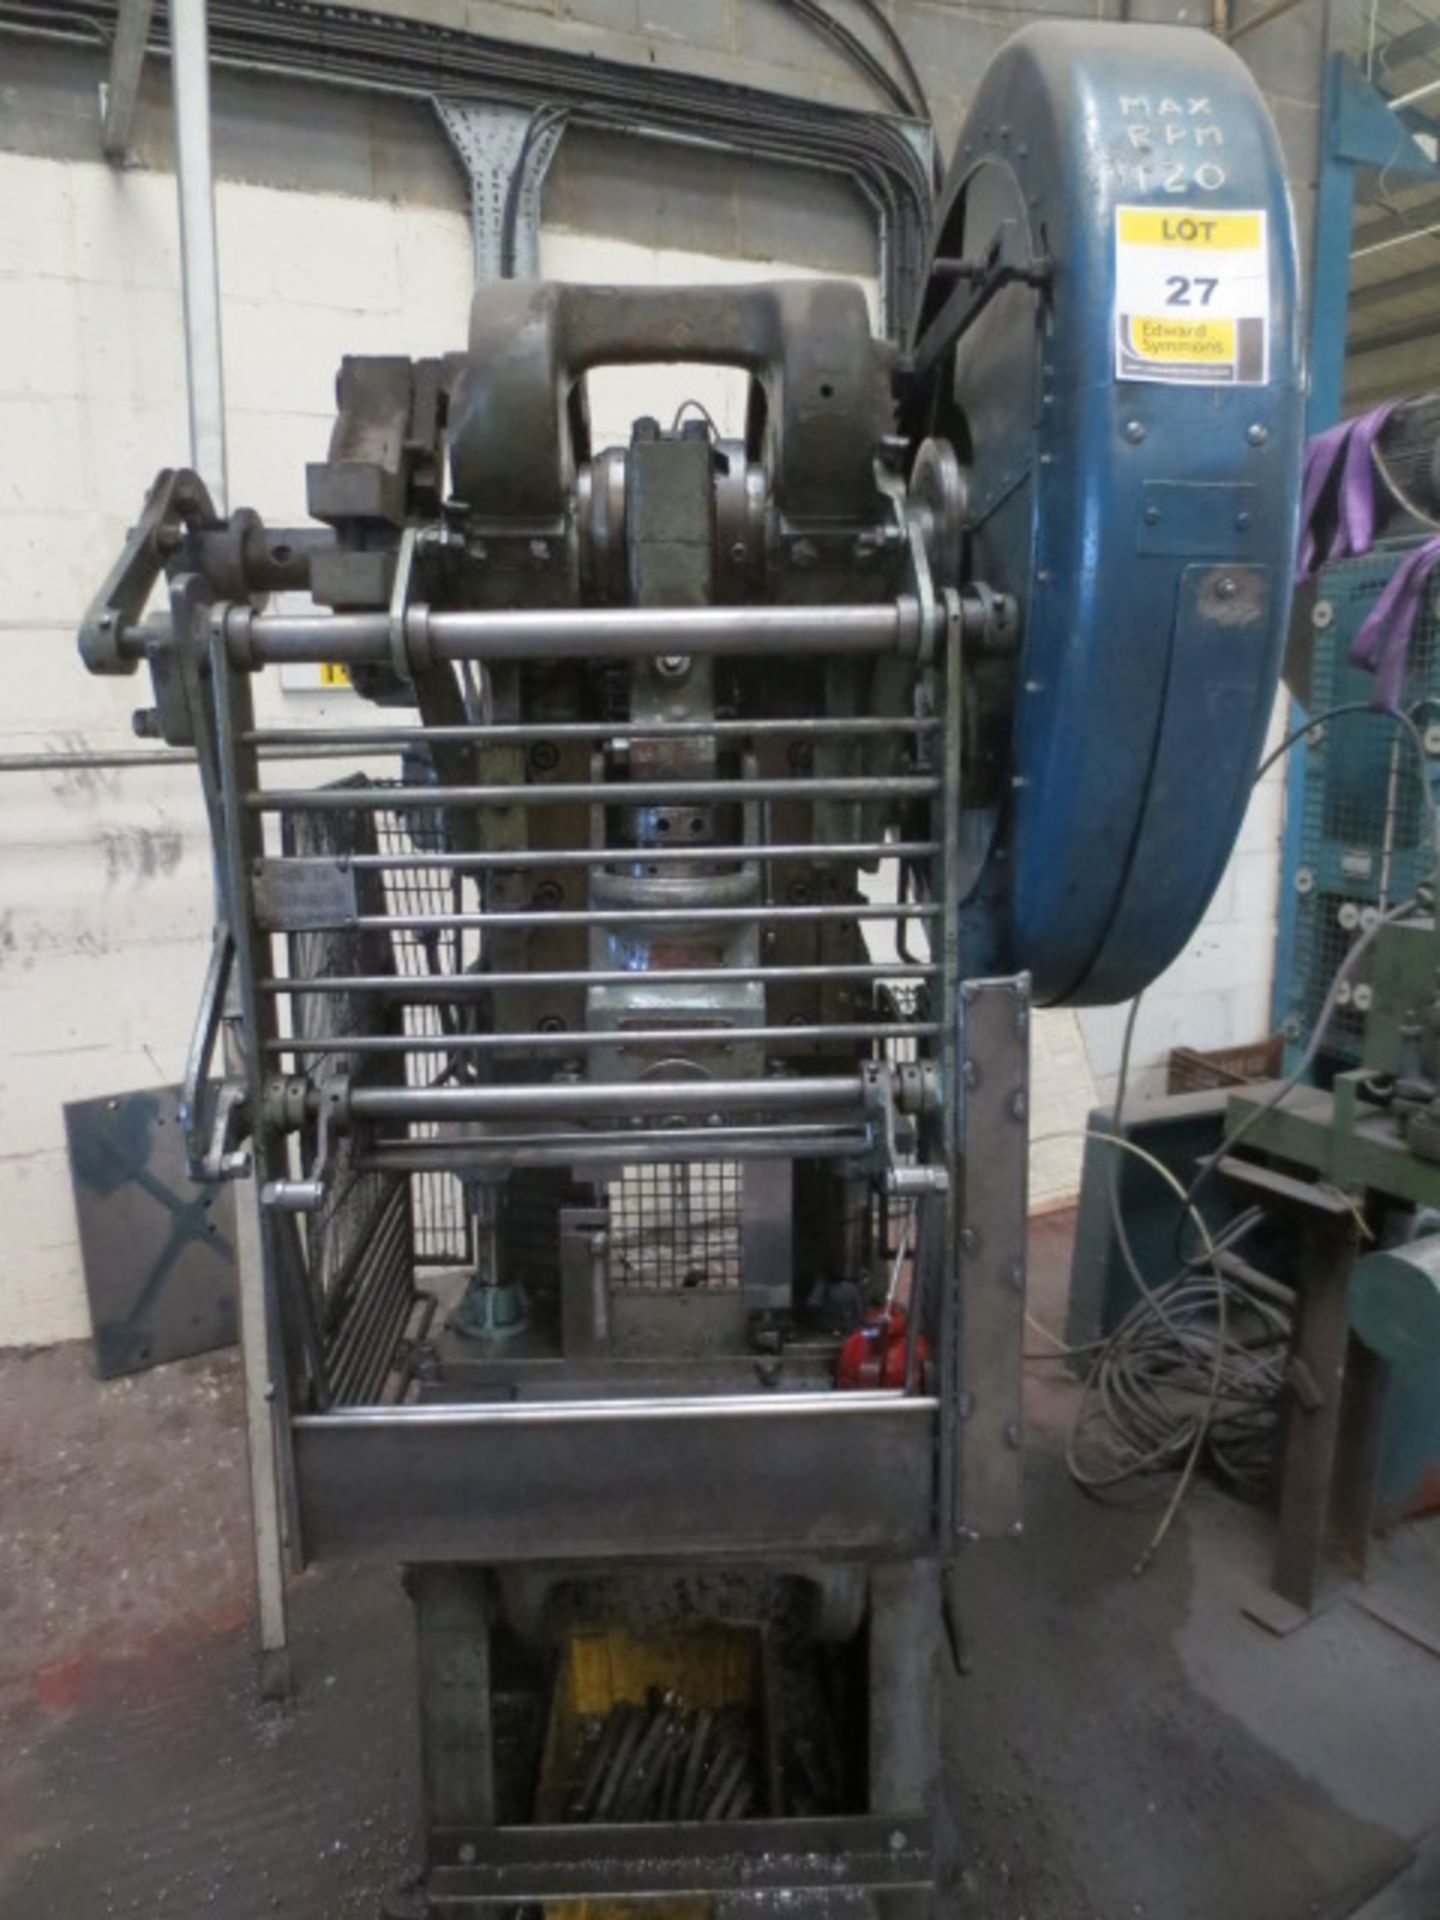 HME 20 ton open fronted inclinable power press, Press No 14. NB: this item has no CE marking. The...